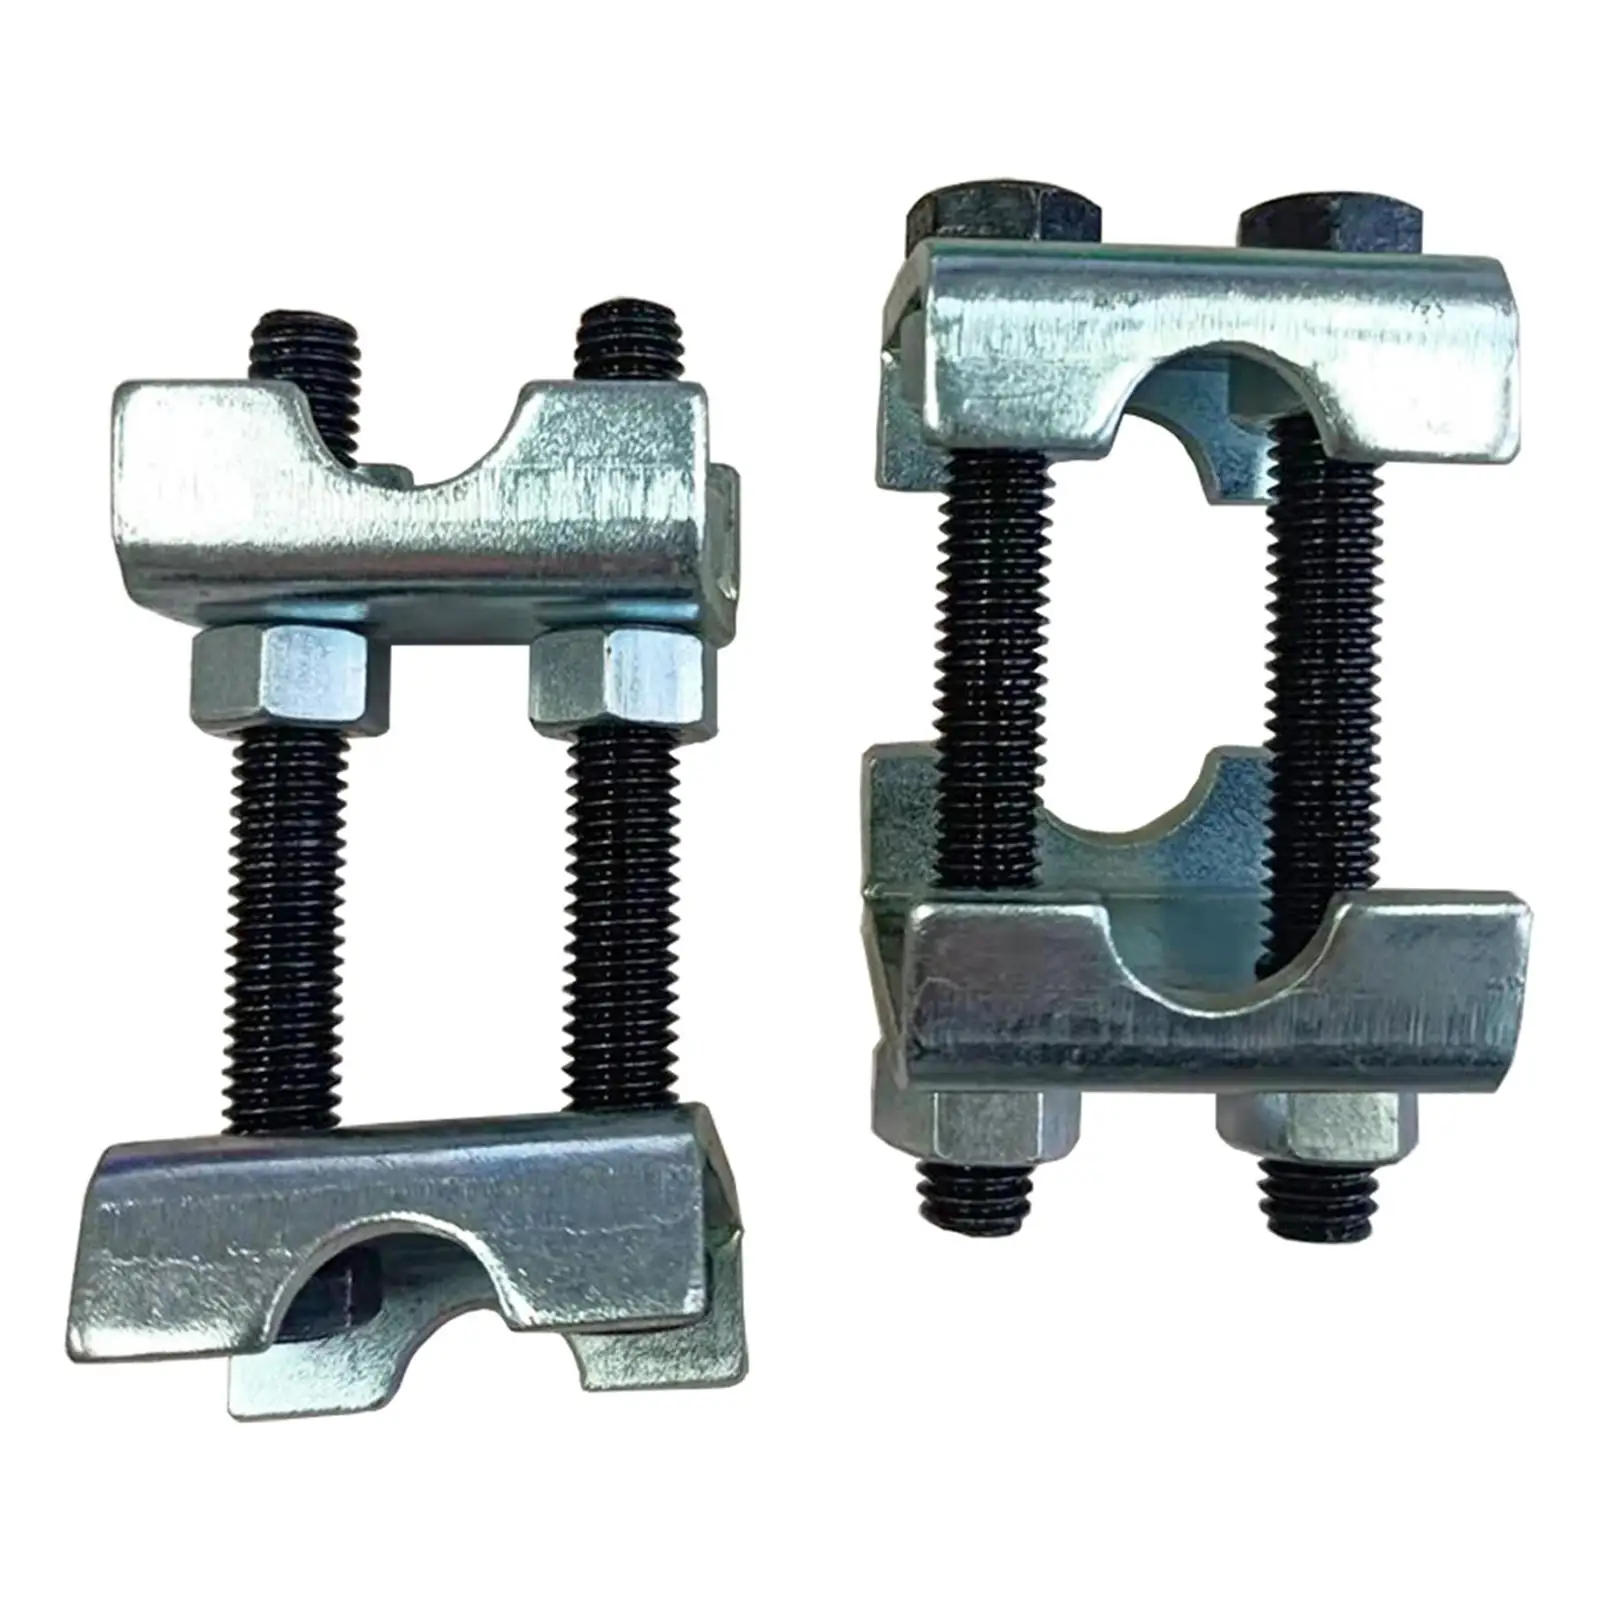 Mini  Compressor Professional Spreads or Compresses Direct Replaces Car Automotive Spare Parts  Adjustable Spring Spacer